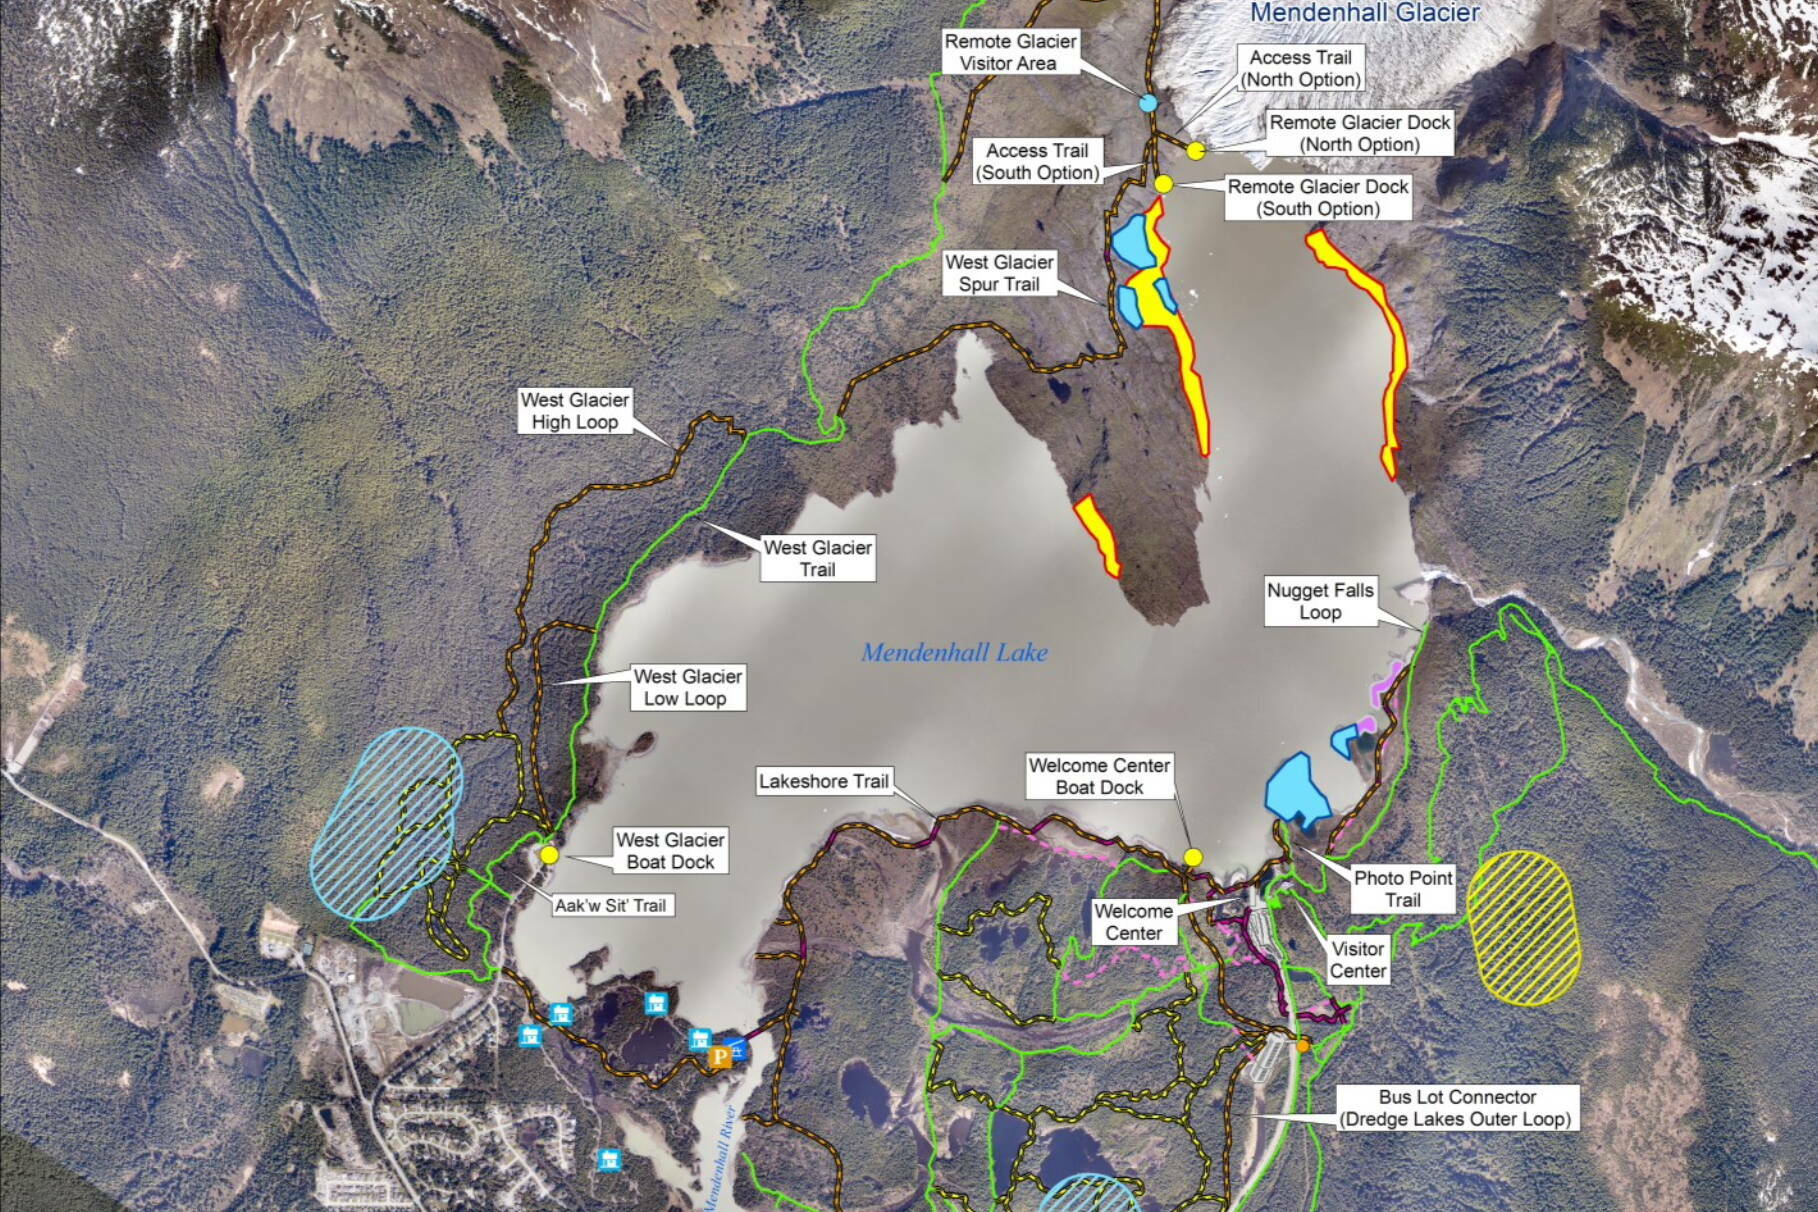 A map showing Alternative 2, the most aggressive of four original options for expanding the Mendenhall Glacier Recreational Area, includes a dock for commercial motor boats that would carry passengers to a new visitor area at the face of the Mendenhall Glacier. That alternative is the “proposed action” by the U.S. Forest Service, but a revised draft Environmental Impact Statement adds three new lower-impact alternatives to three others already being considered. (U.S. Forest Service)